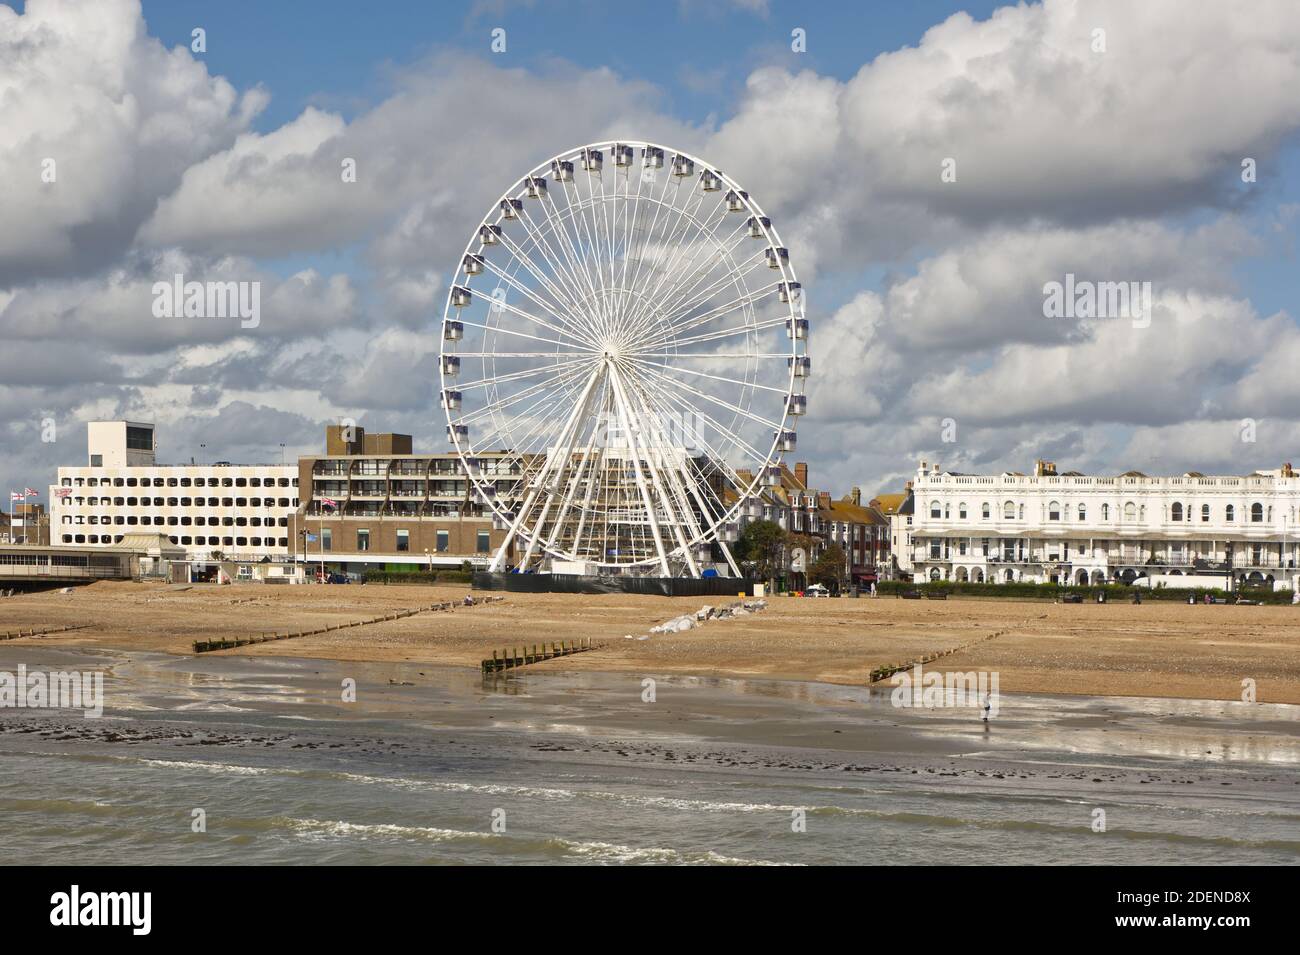 Seafront and beach at Worthing, West Sussex, England. With Ferris wheel viewed from pier. Stock Photo